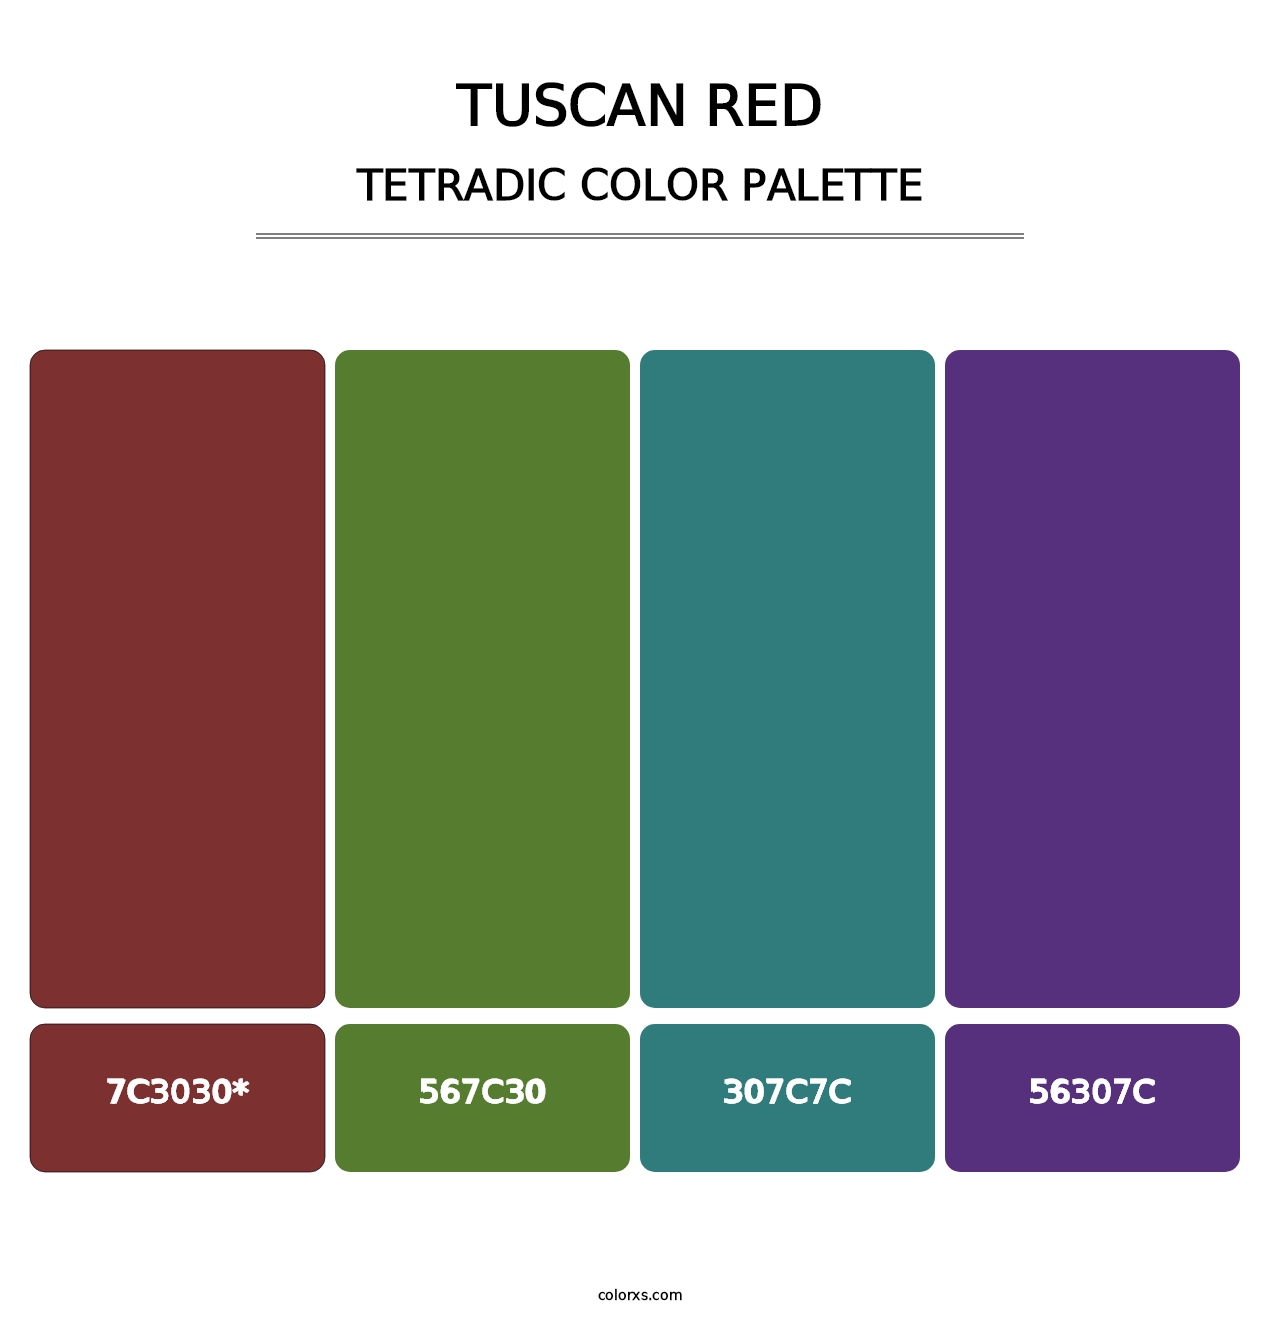 Tuscan Red - Tetradic Color Palette